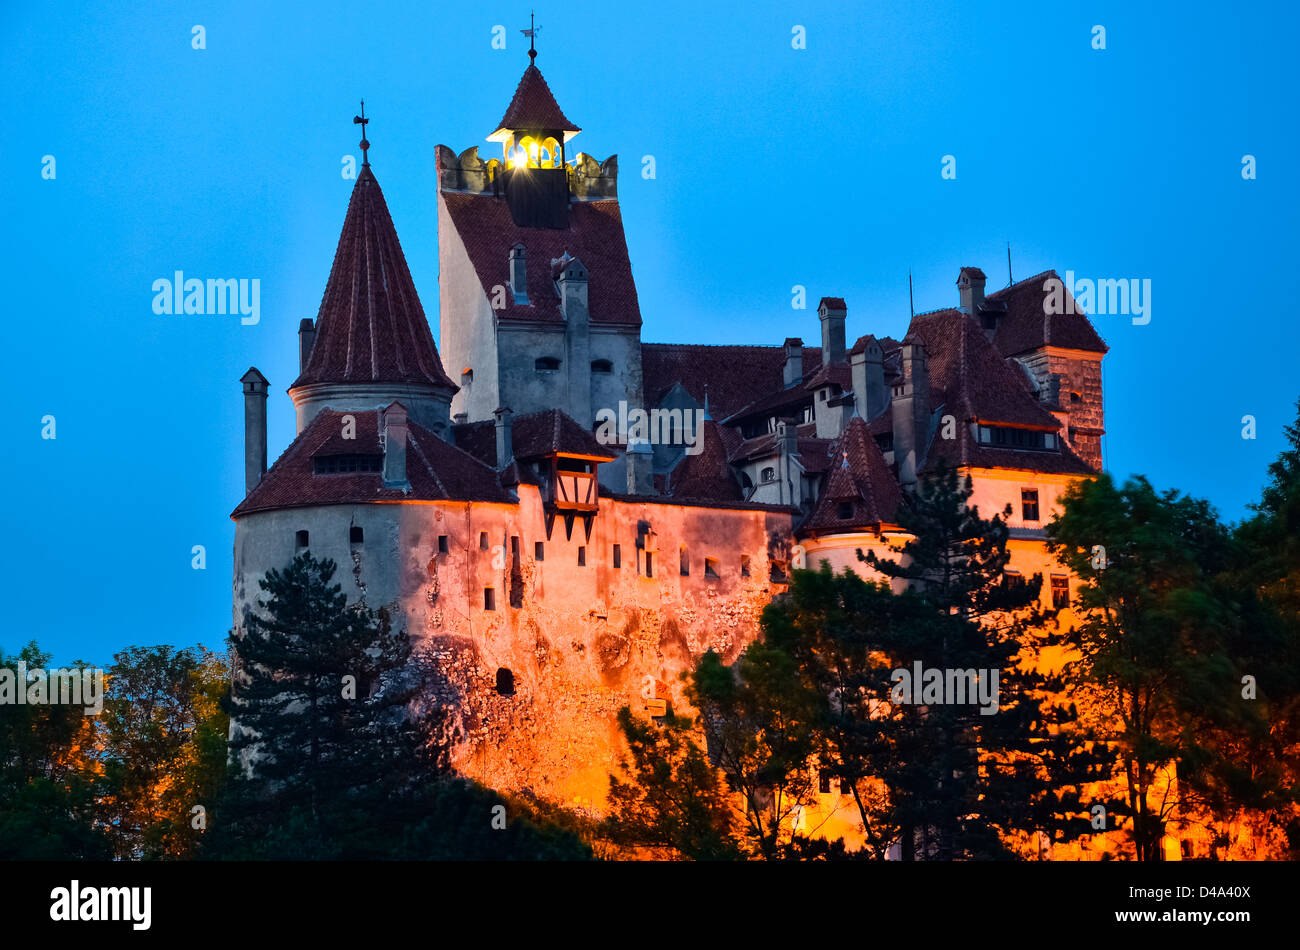 Bran Castle - Count Dracula's Castle, Romania,the mythic place from where the legend of dracula emerged Stock Photo